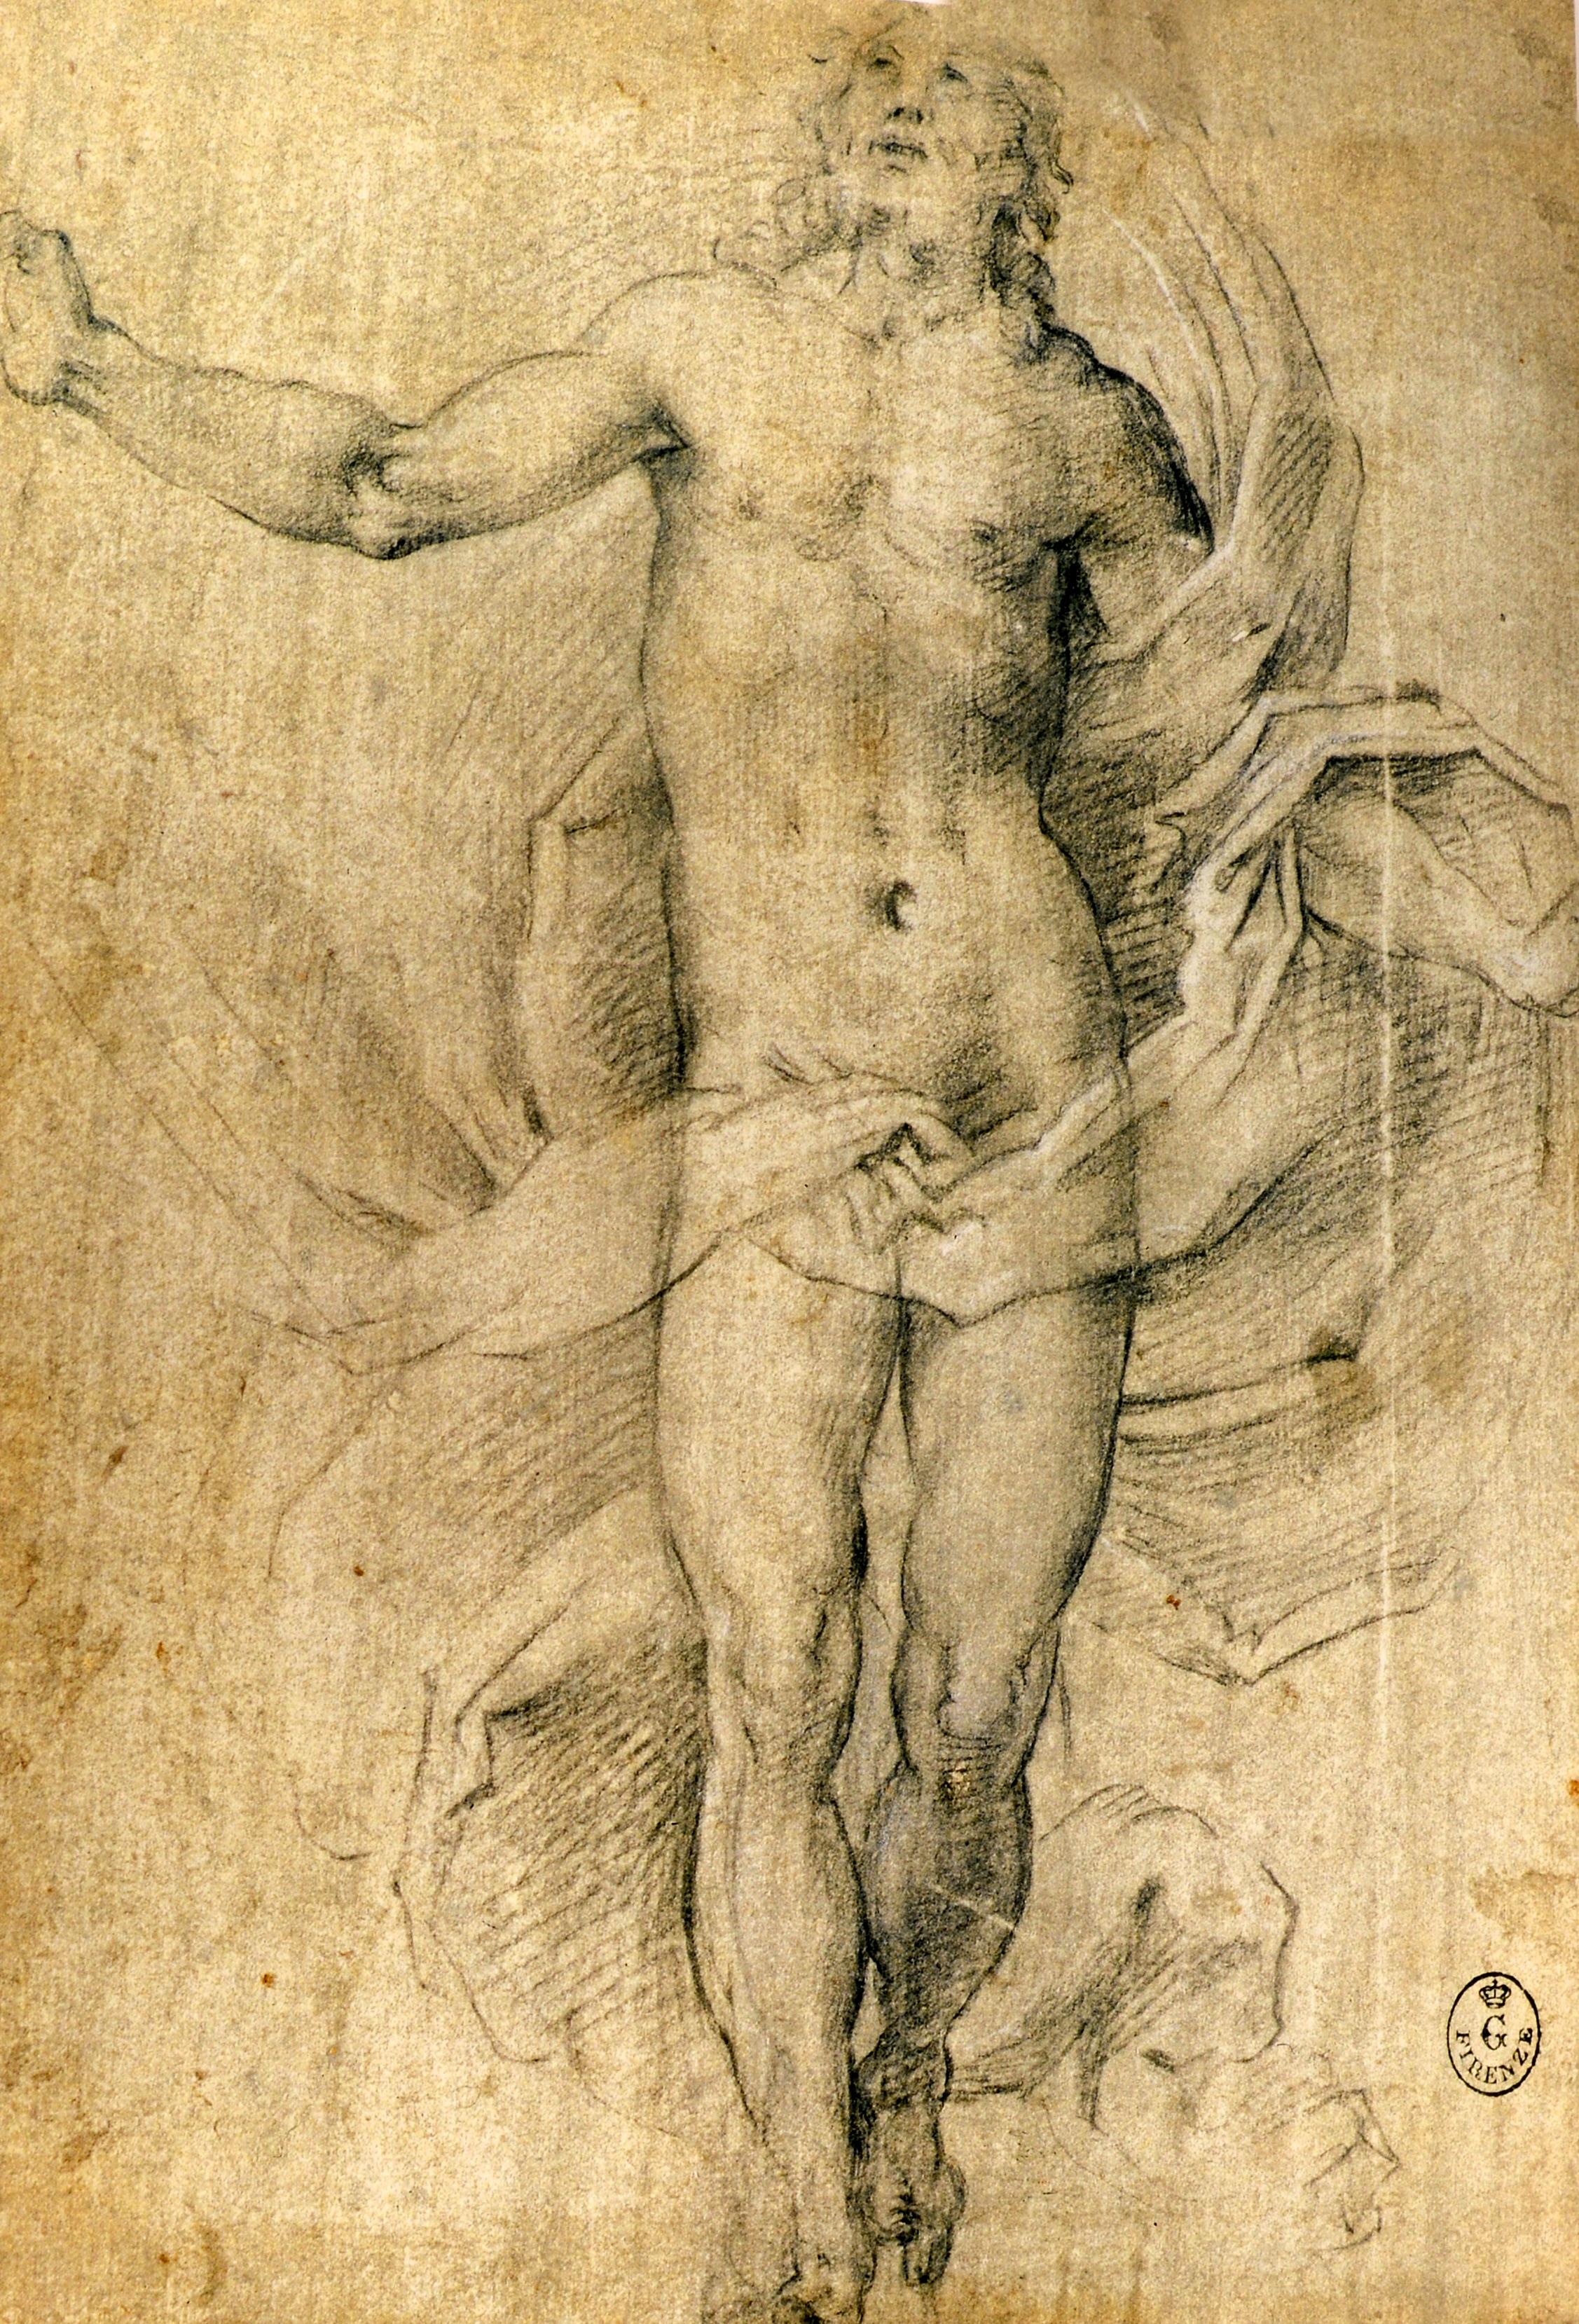 Paper Michelangelo, Vasari, and Their Contemporaries: Drawings from the Uffizi, 1st Ed